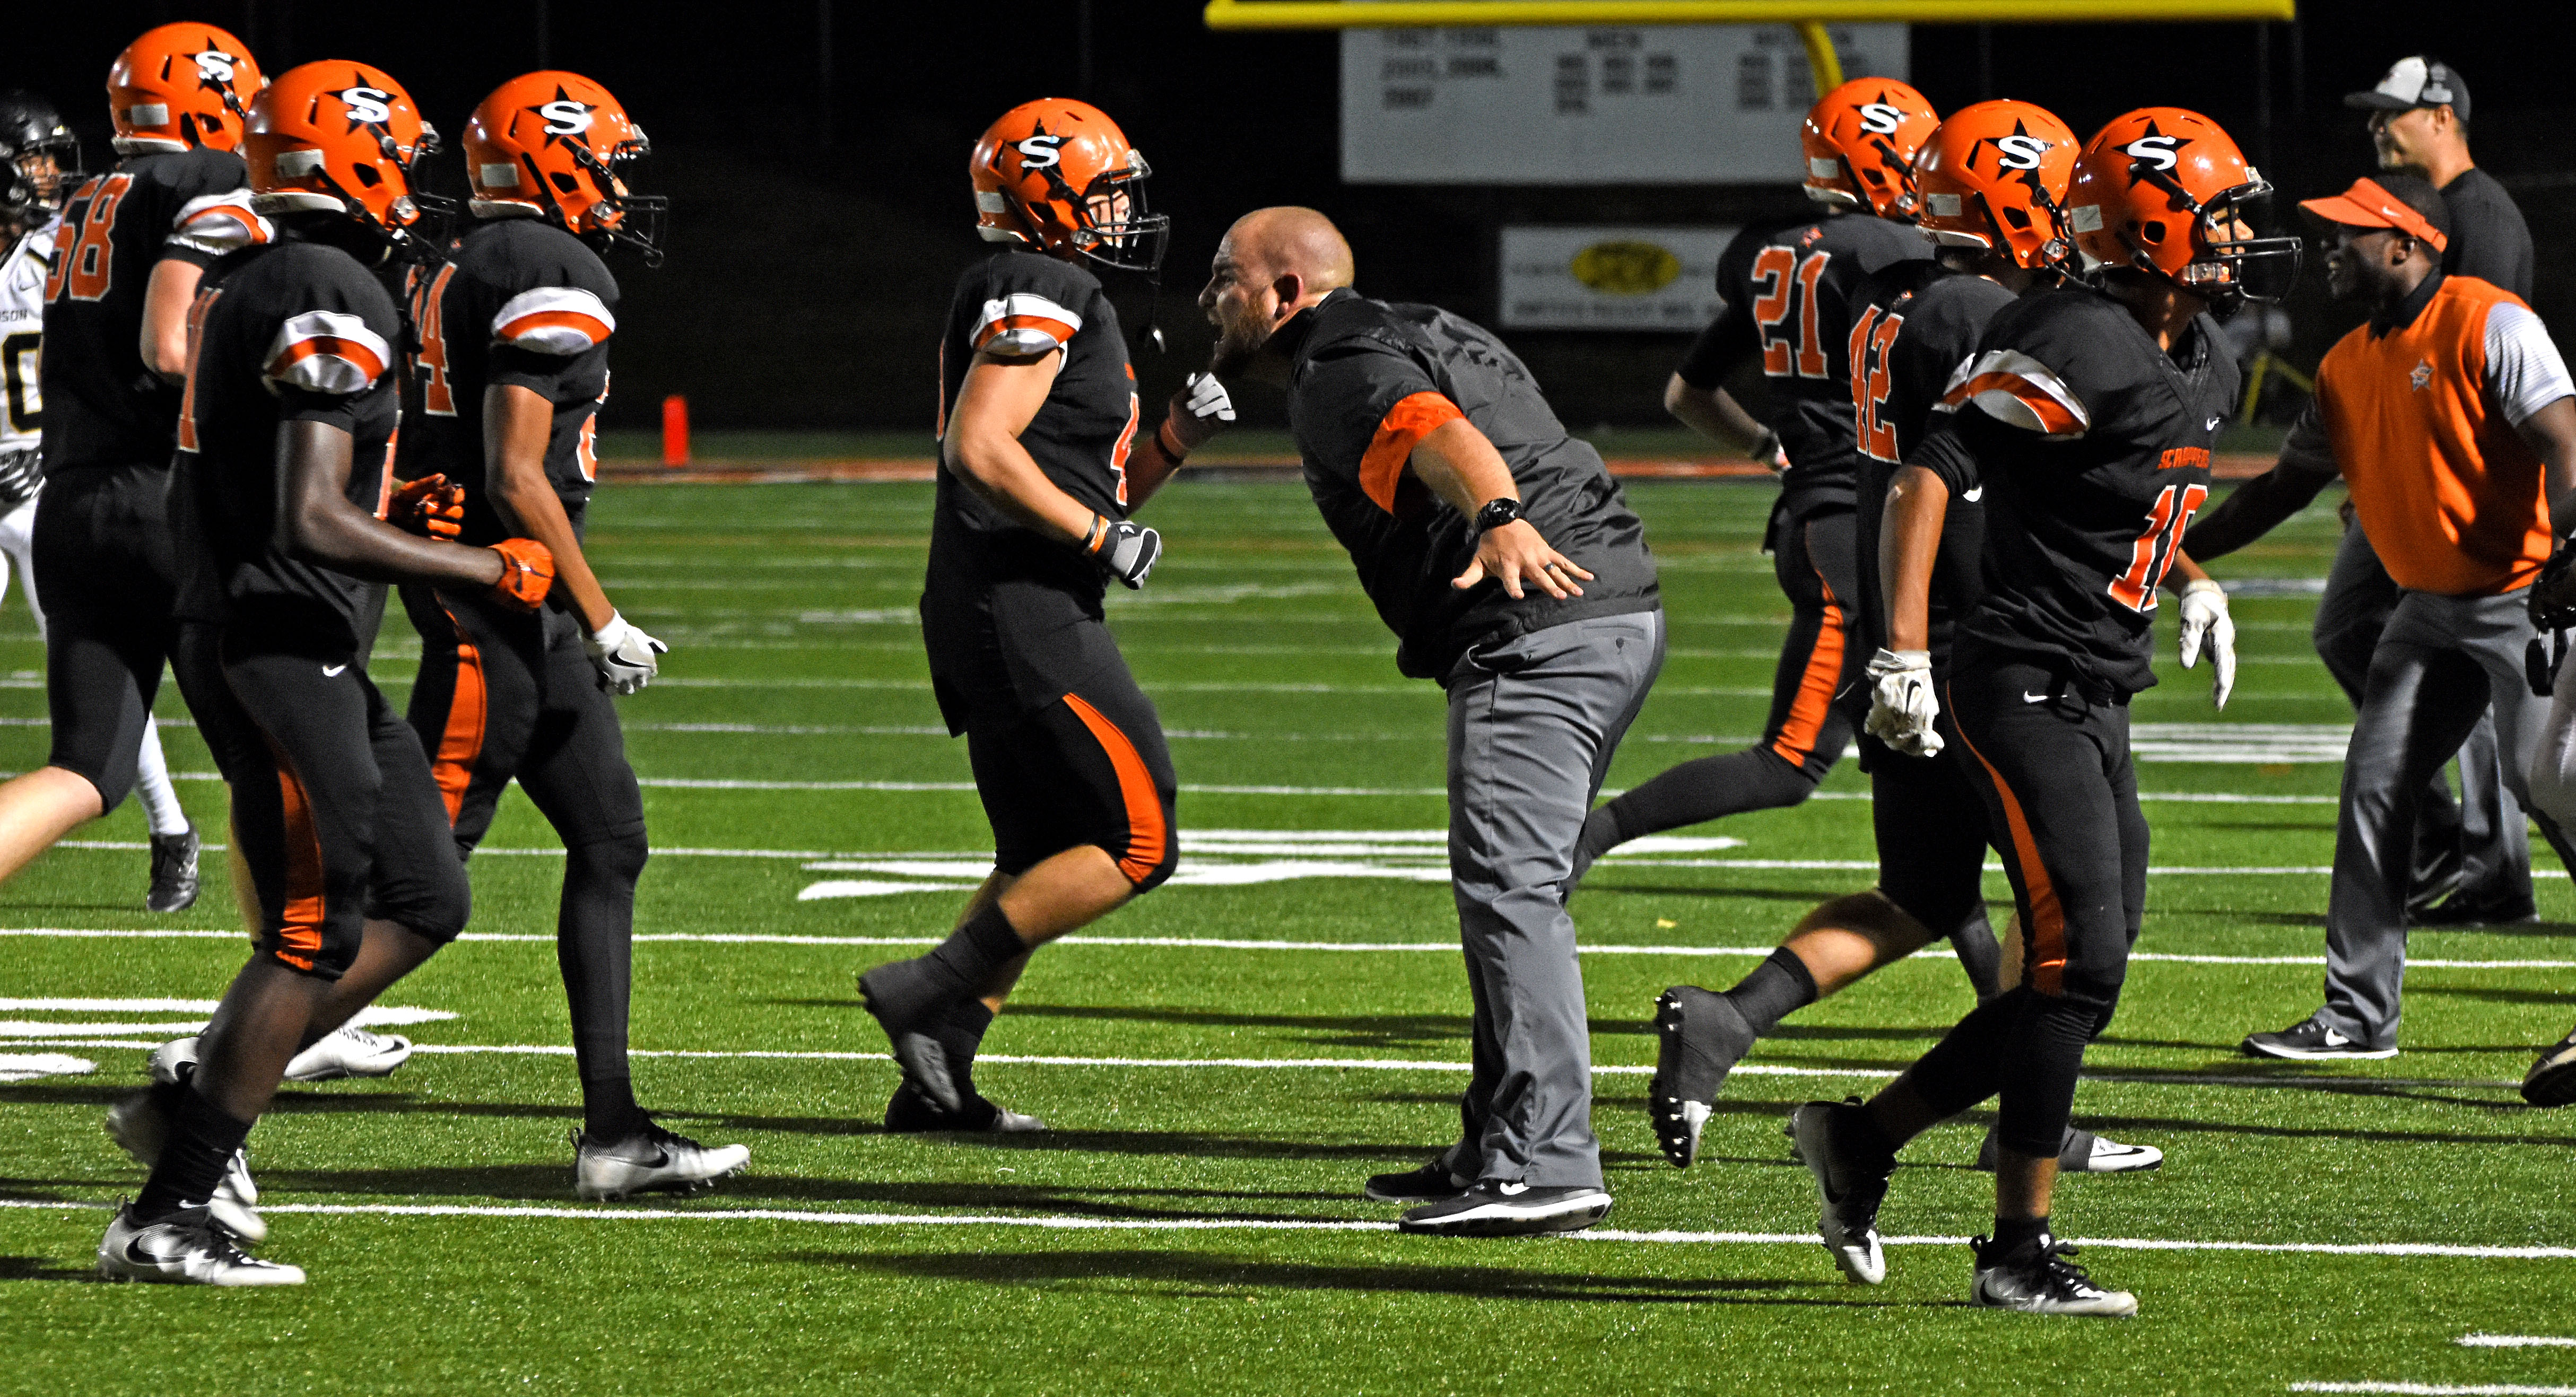 Coach Brad Chesshir congratulates his Scrapper defenders after a Robinson turnover in Nashville's 31-28 District 7-4A victory last Friday night.